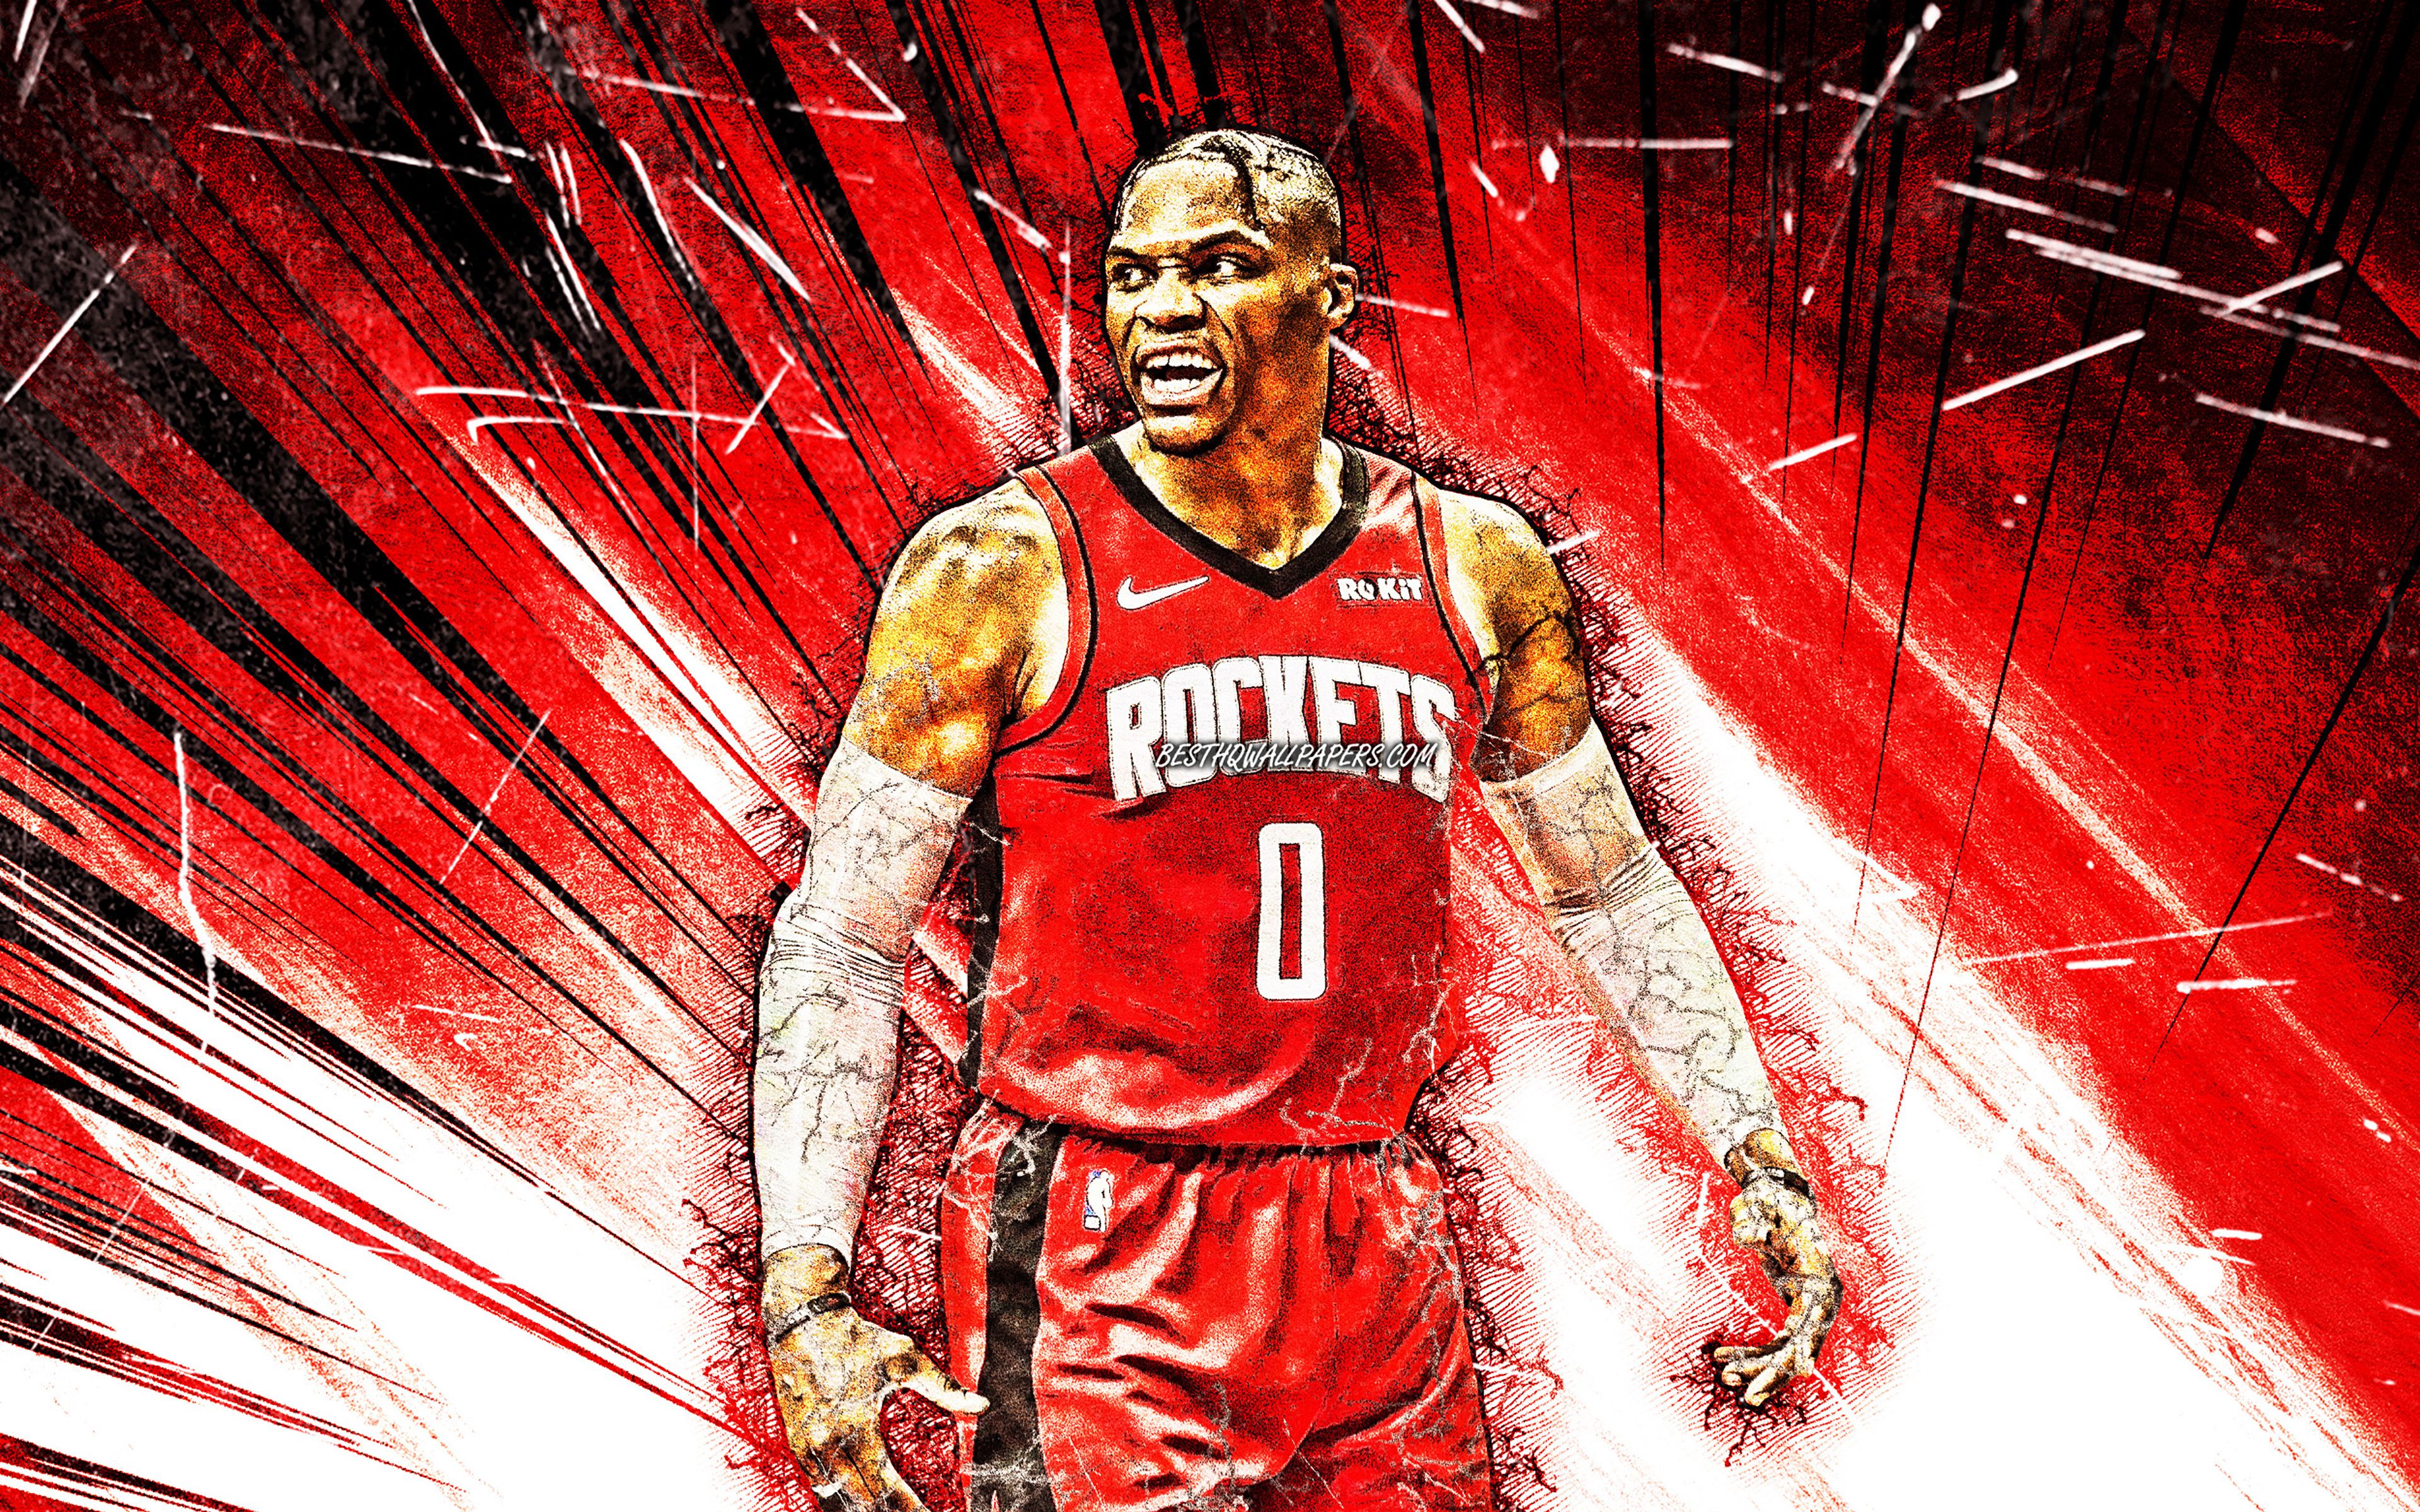 Download wallpaper 4k, Russell Westbrook, grunge art, Houston Rockets, NBA, red astract rays, basketball stars, Russell Westbrook III, basketball, USA, Russell Westbrook Houston Rockets, creative, Russell Westbrook 4K for desktop with